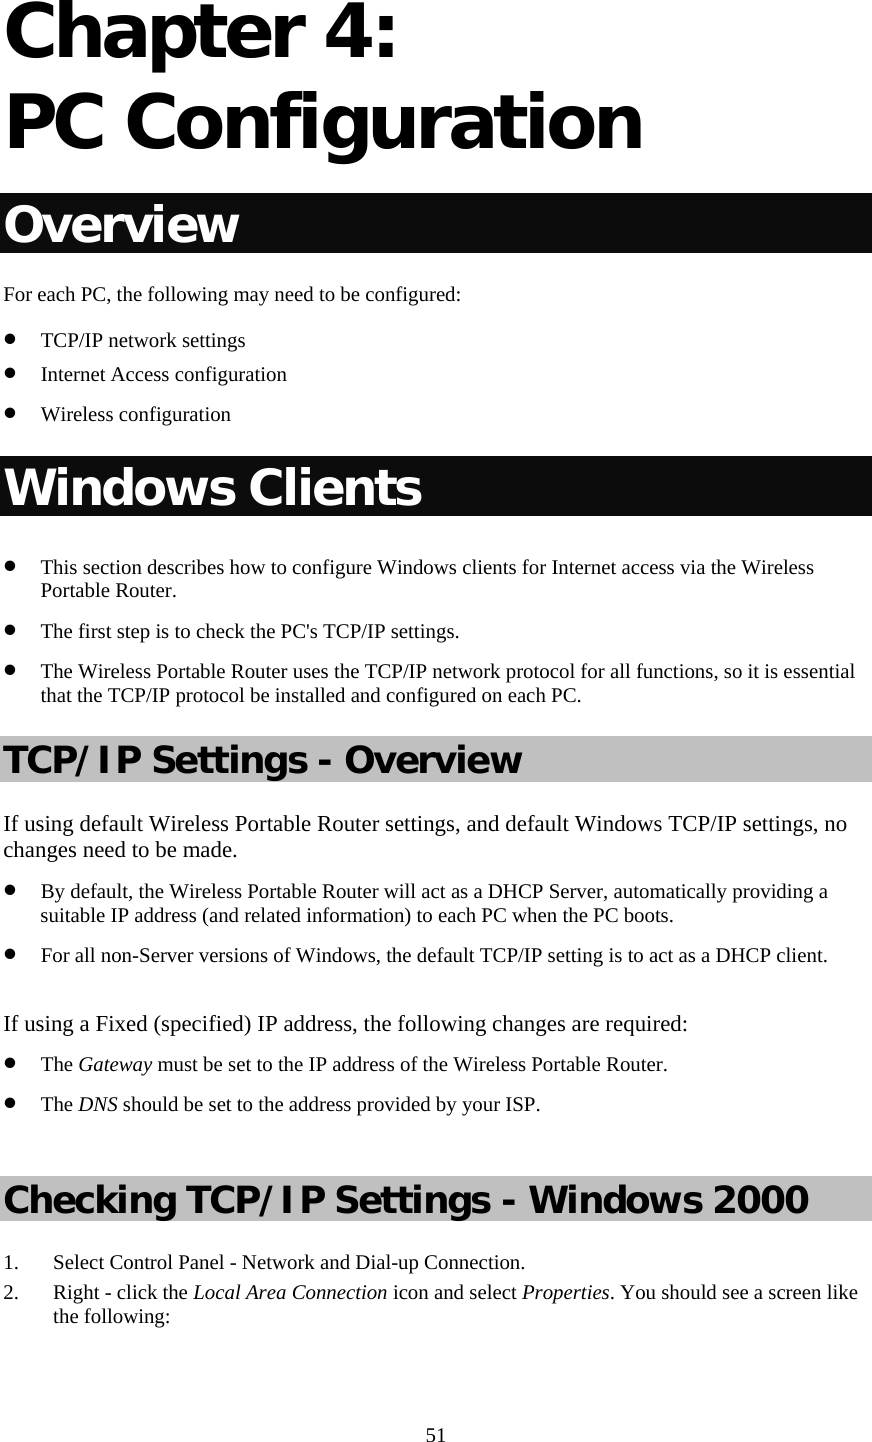   51 Chapter 4:  PC Configuration Overview For each PC, the following may need to be configured: • TCP/IP network settings • Internet Access configuration • Wireless configuration Windows Clients • This section describes how to configure Windows clients for Internet access via the Wireless Portable Router. • The first step is to check the PC&apos;s TCP/IP settings.  • The Wireless Portable Router uses the TCP/IP network protocol for all functions, so it is essential that the TCP/IP protocol be installed and configured on each PC. TCP/IP Settings - Overview If using default Wireless Portable Router settings, and default Windows TCP/IP settings, no changes need to be made. • By default, the Wireless Portable Router will act as a DHCP Server, automatically providing a suitable IP address (and related information) to each PC when the PC boots. • For all non-Server versions of Windows, the default TCP/IP setting is to act as a DHCP client.  If using a Fixed (specified) IP address, the following changes are required: • The Gateway must be set to the IP address of the Wireless Portable Router. • The DNS should be set to the address provided by your ISP.  Checking TCP/IP Settings - Windows 2000 1. Select Control Panel - Network and Dial-up Connection. 2. Right - click the Local Area Connection icon and select Properties. You should see a screen like the following: 